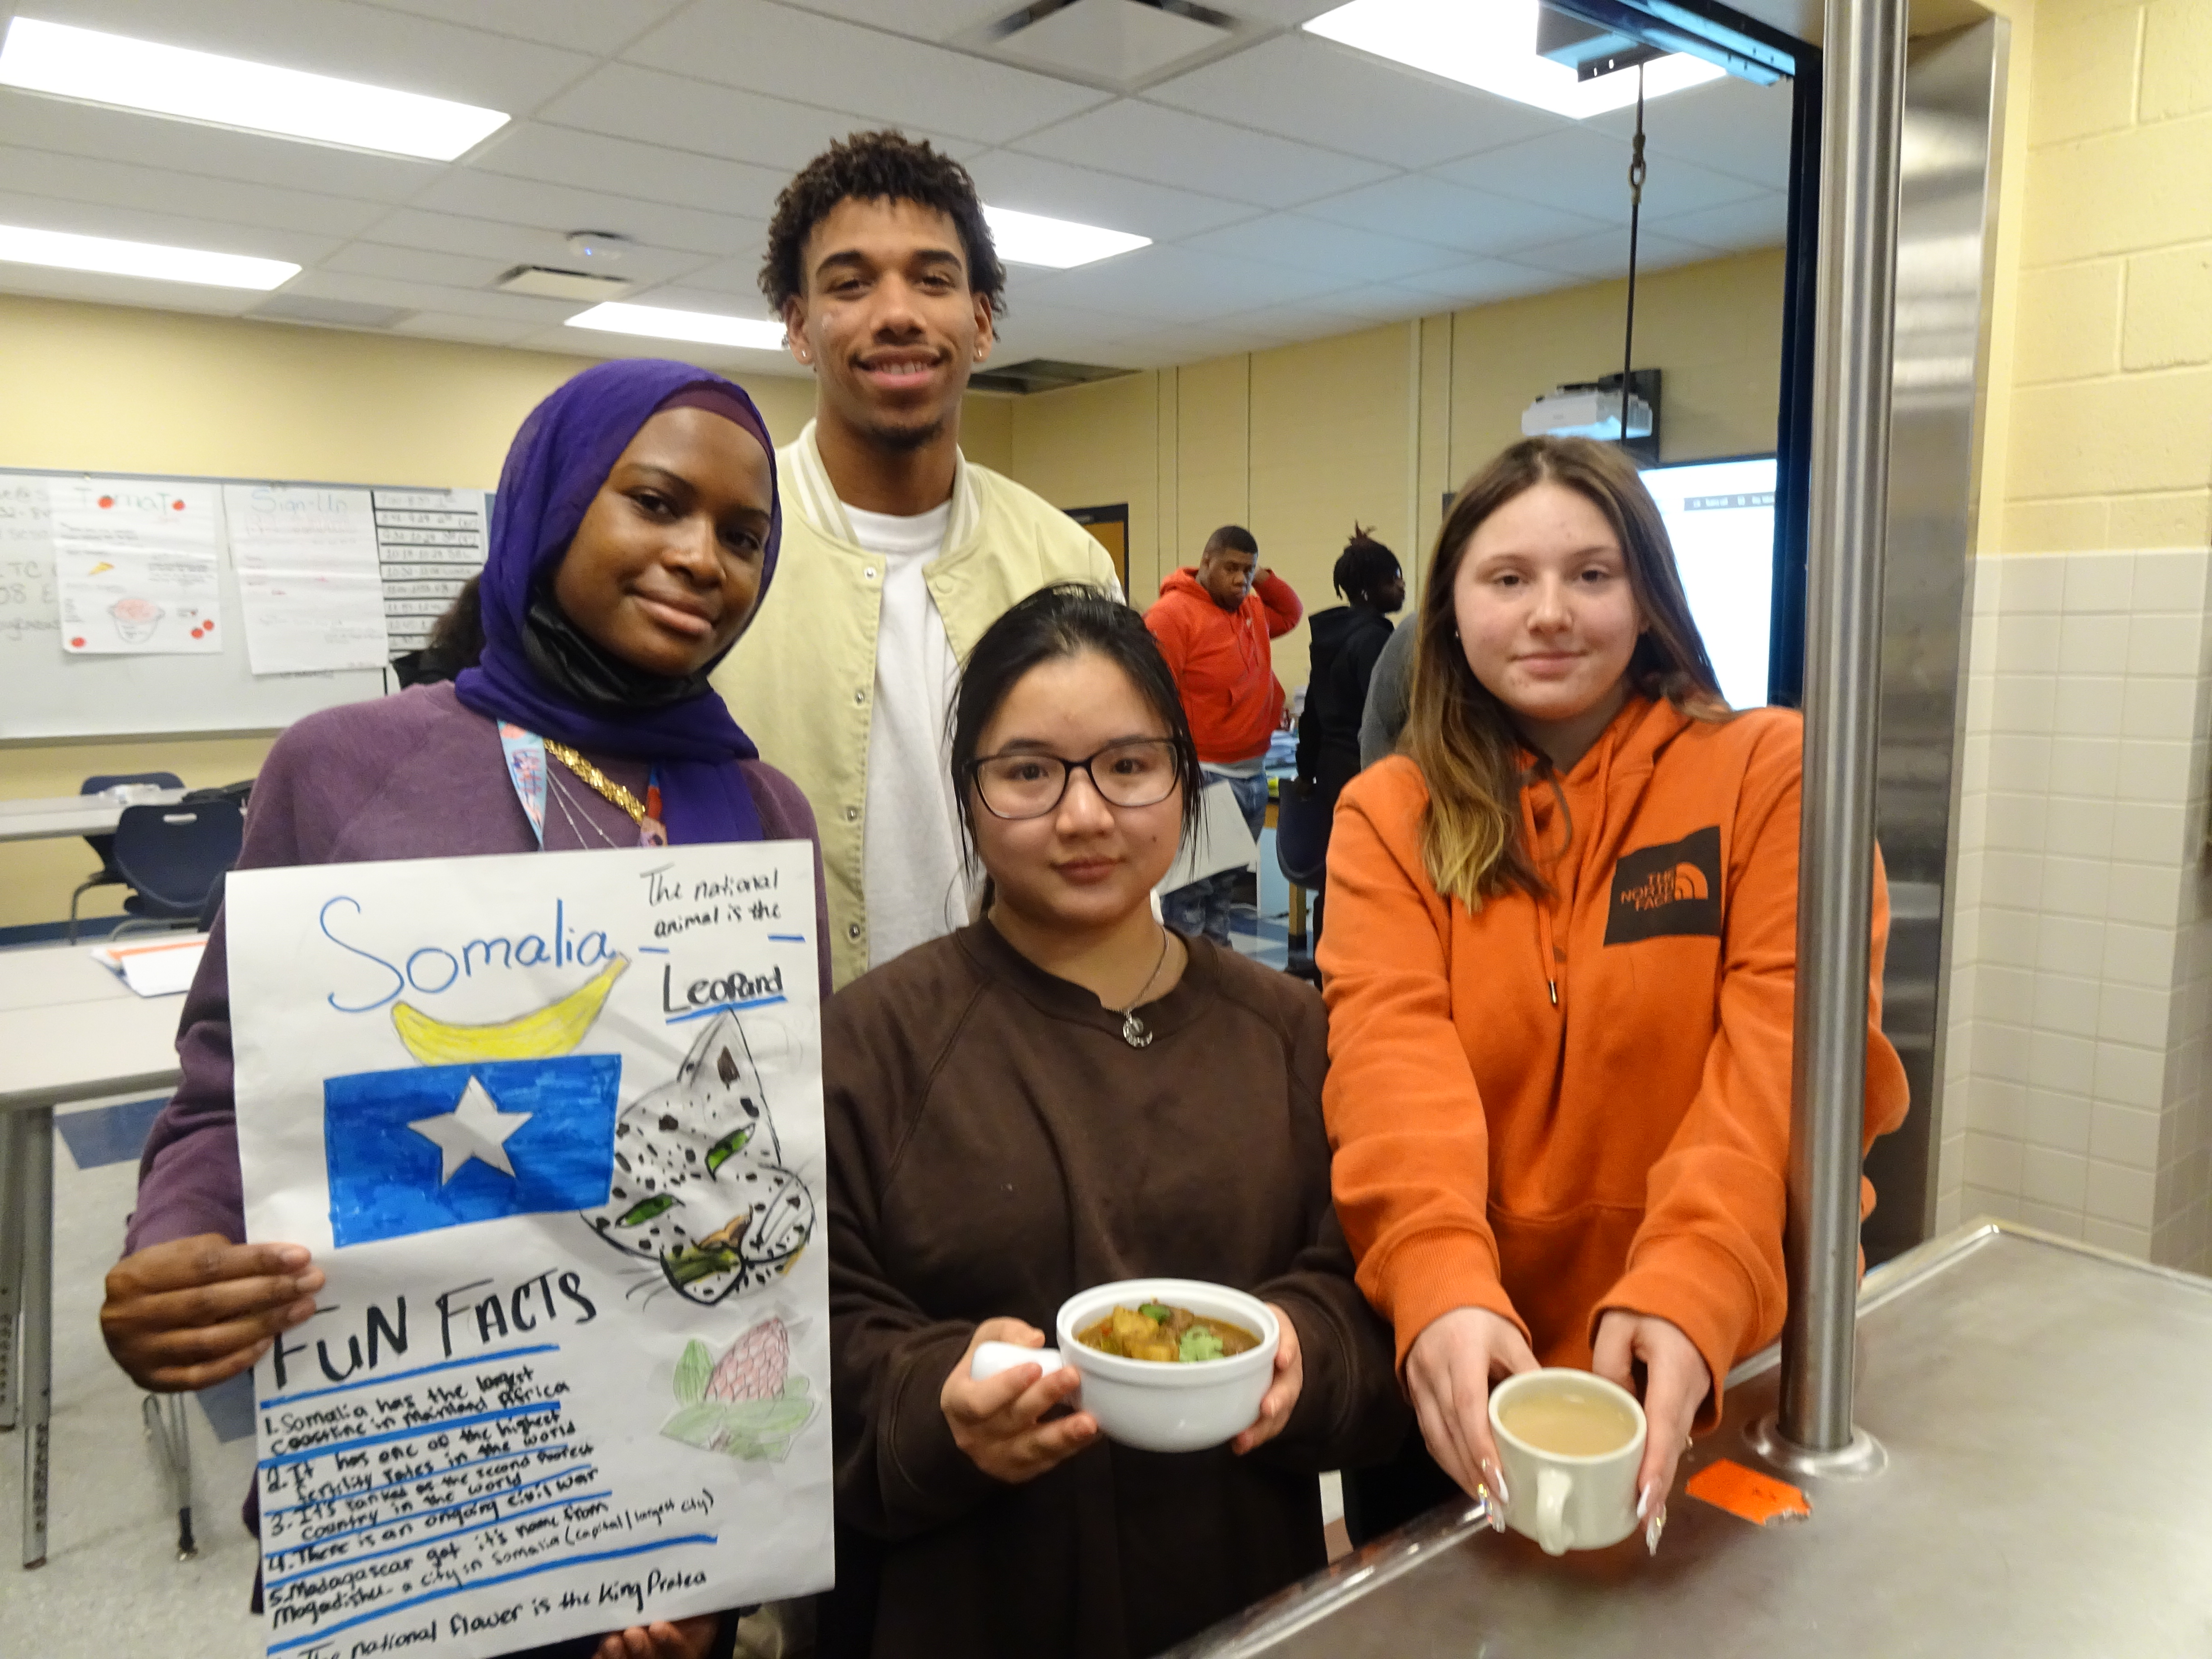 This is a photo of four ITC students standing in the kitchen in their school, holding a poster about Somalia and two dishes that they created from that nation.